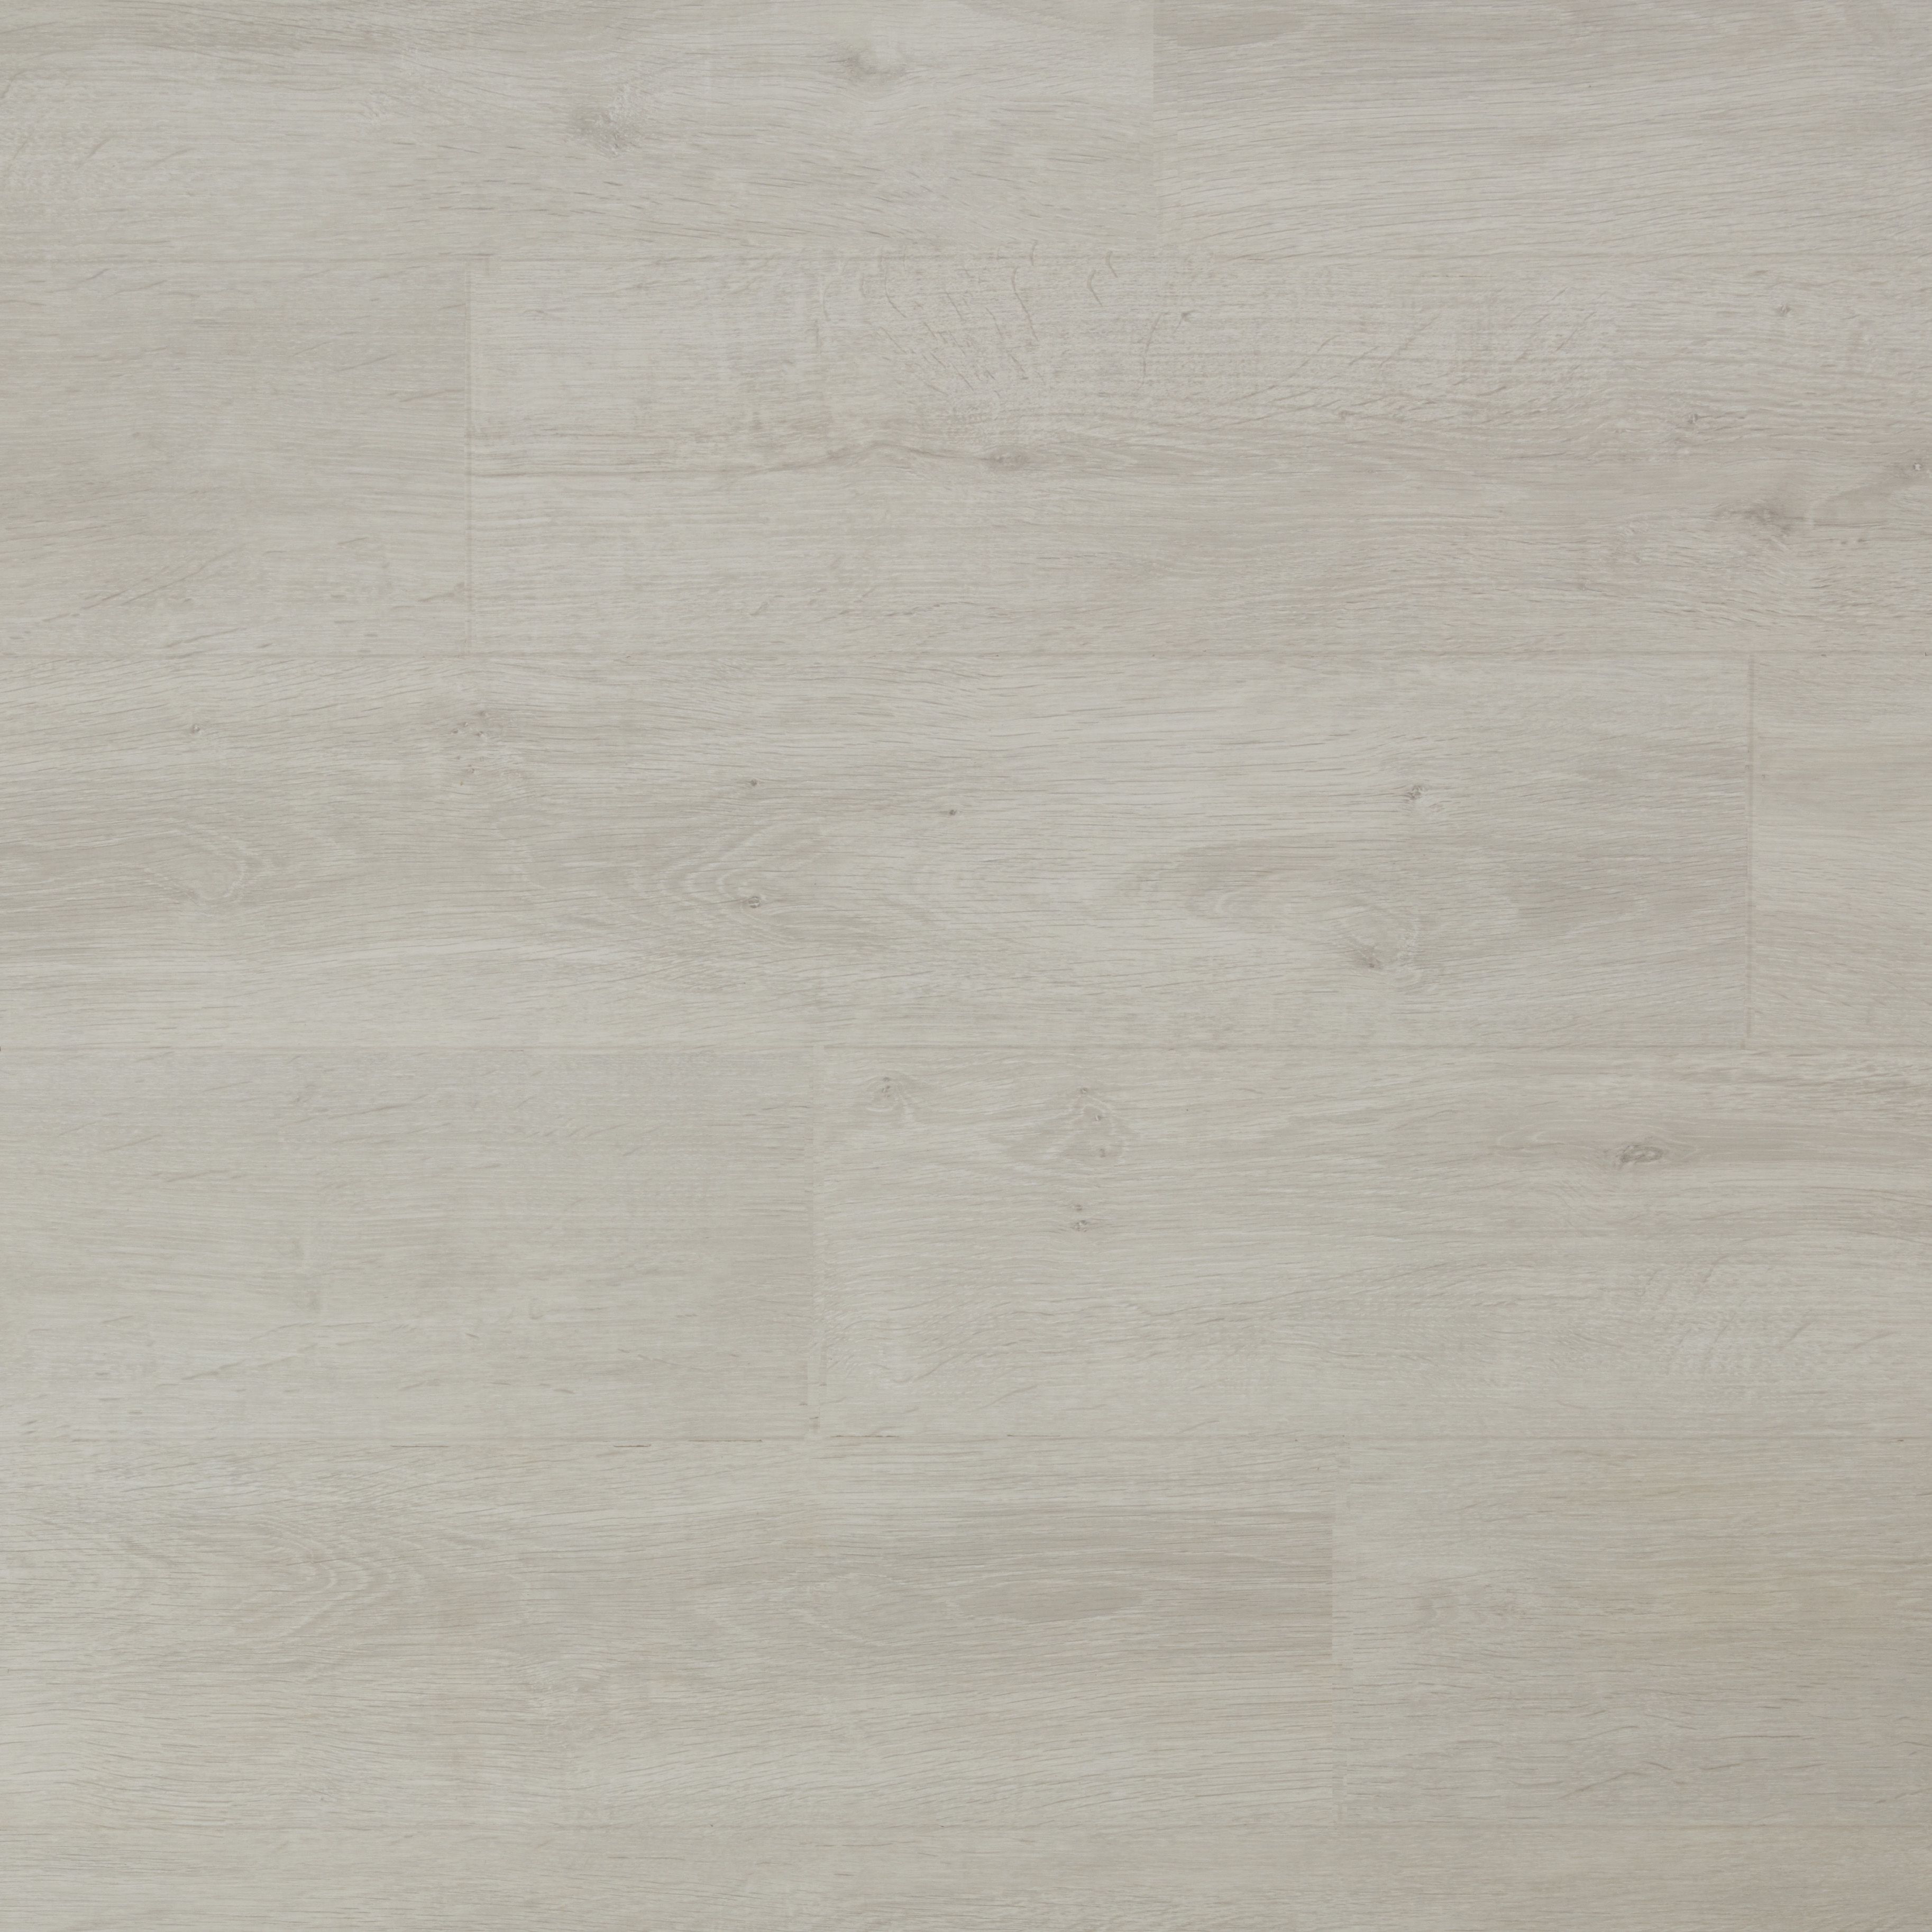 Colours Geelong Structured Grey wood effect Laminate Flooring Sample